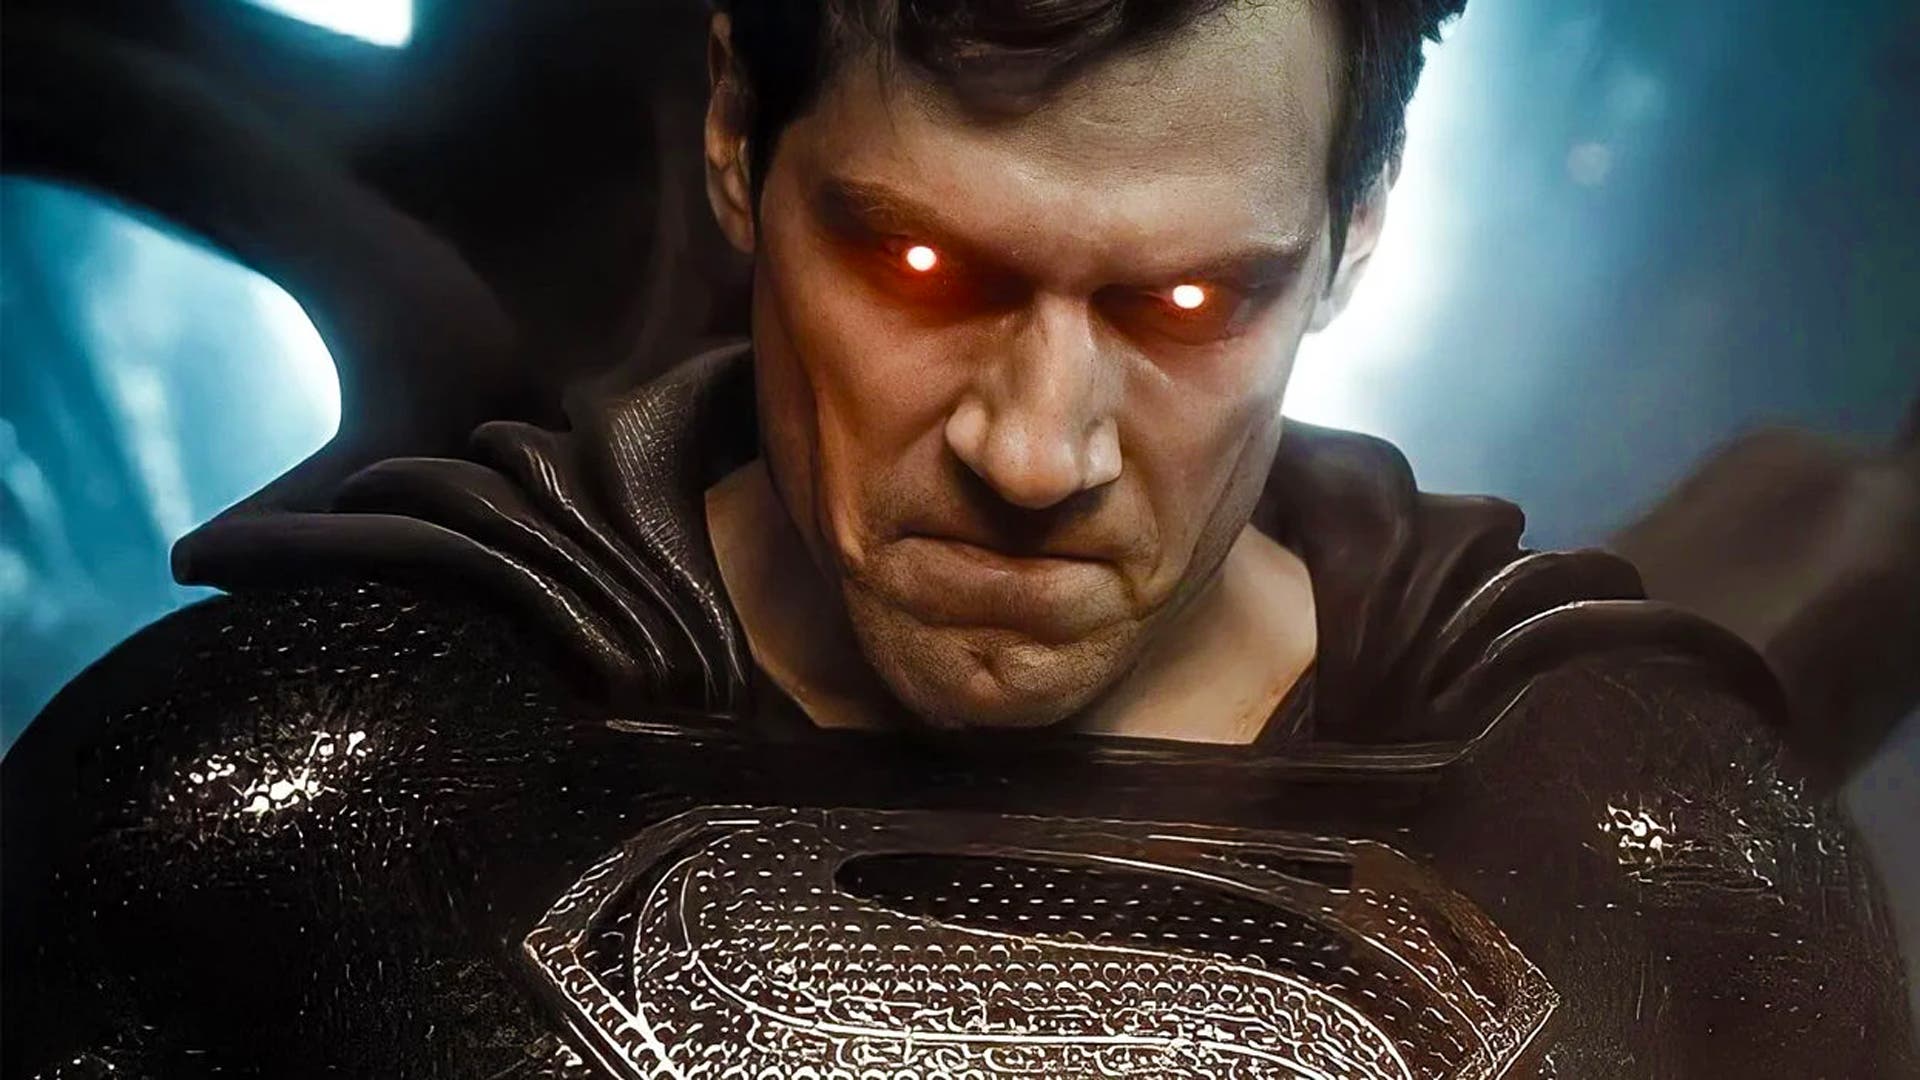 Superman soars in new teaser for 'Zack Snyder's Justice League'